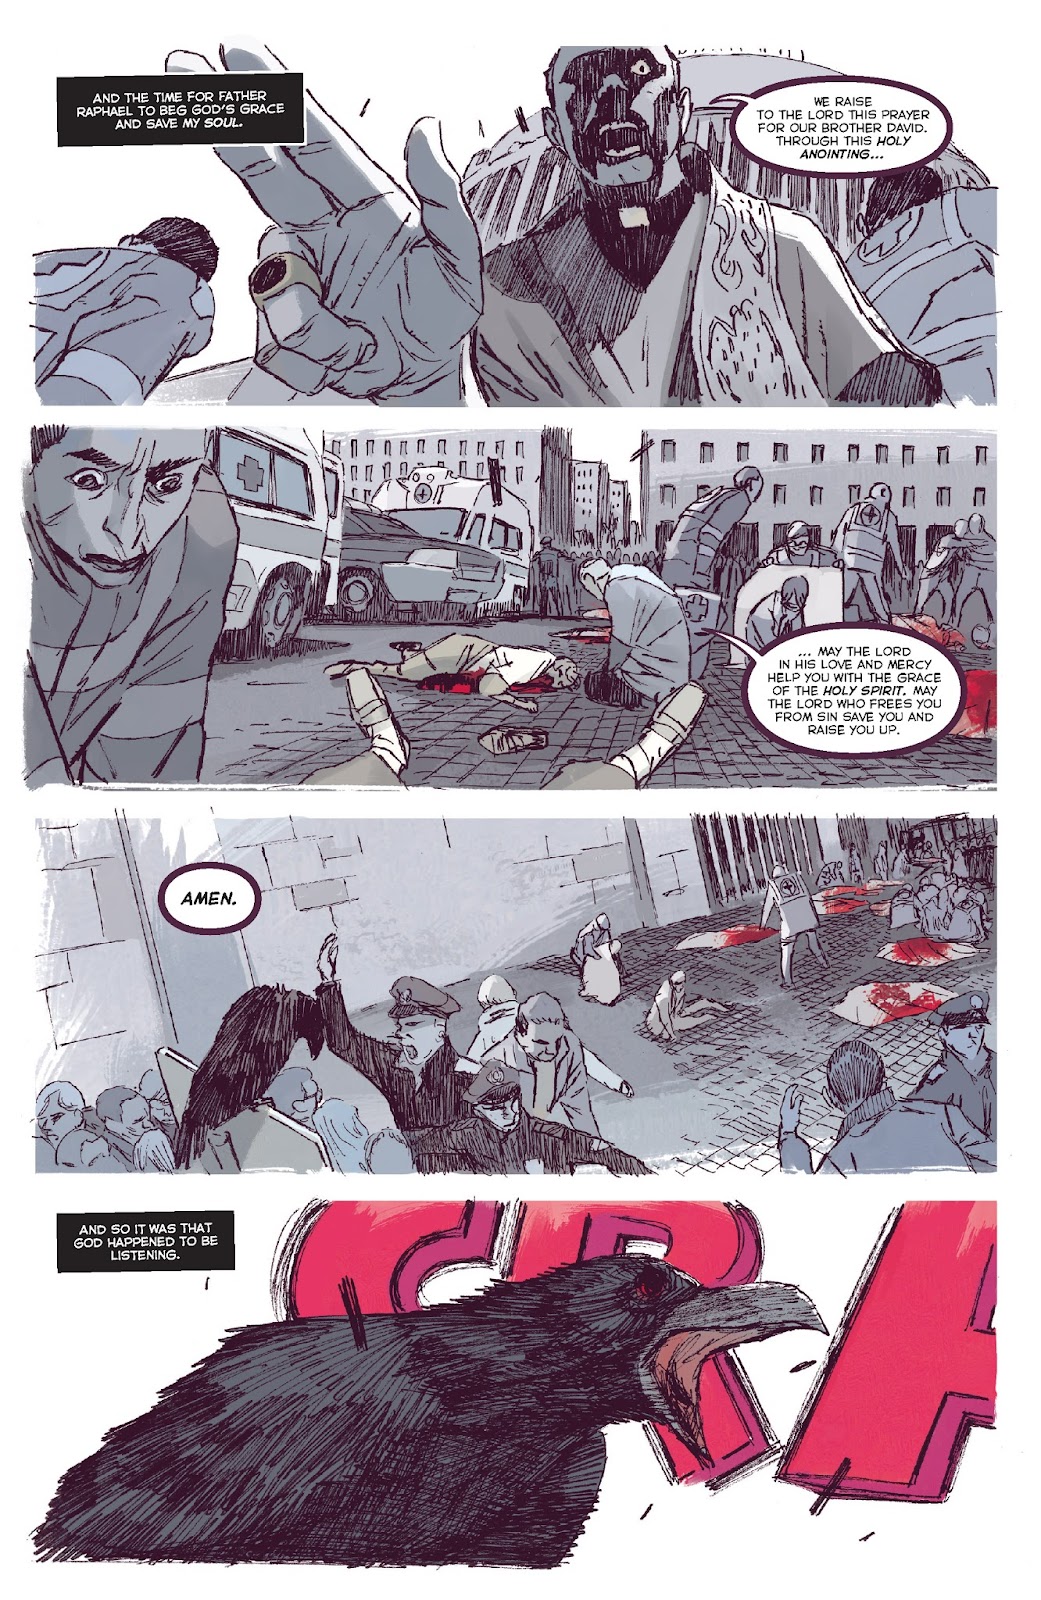 The Crow: Memento Mori issue 1 - Page 11